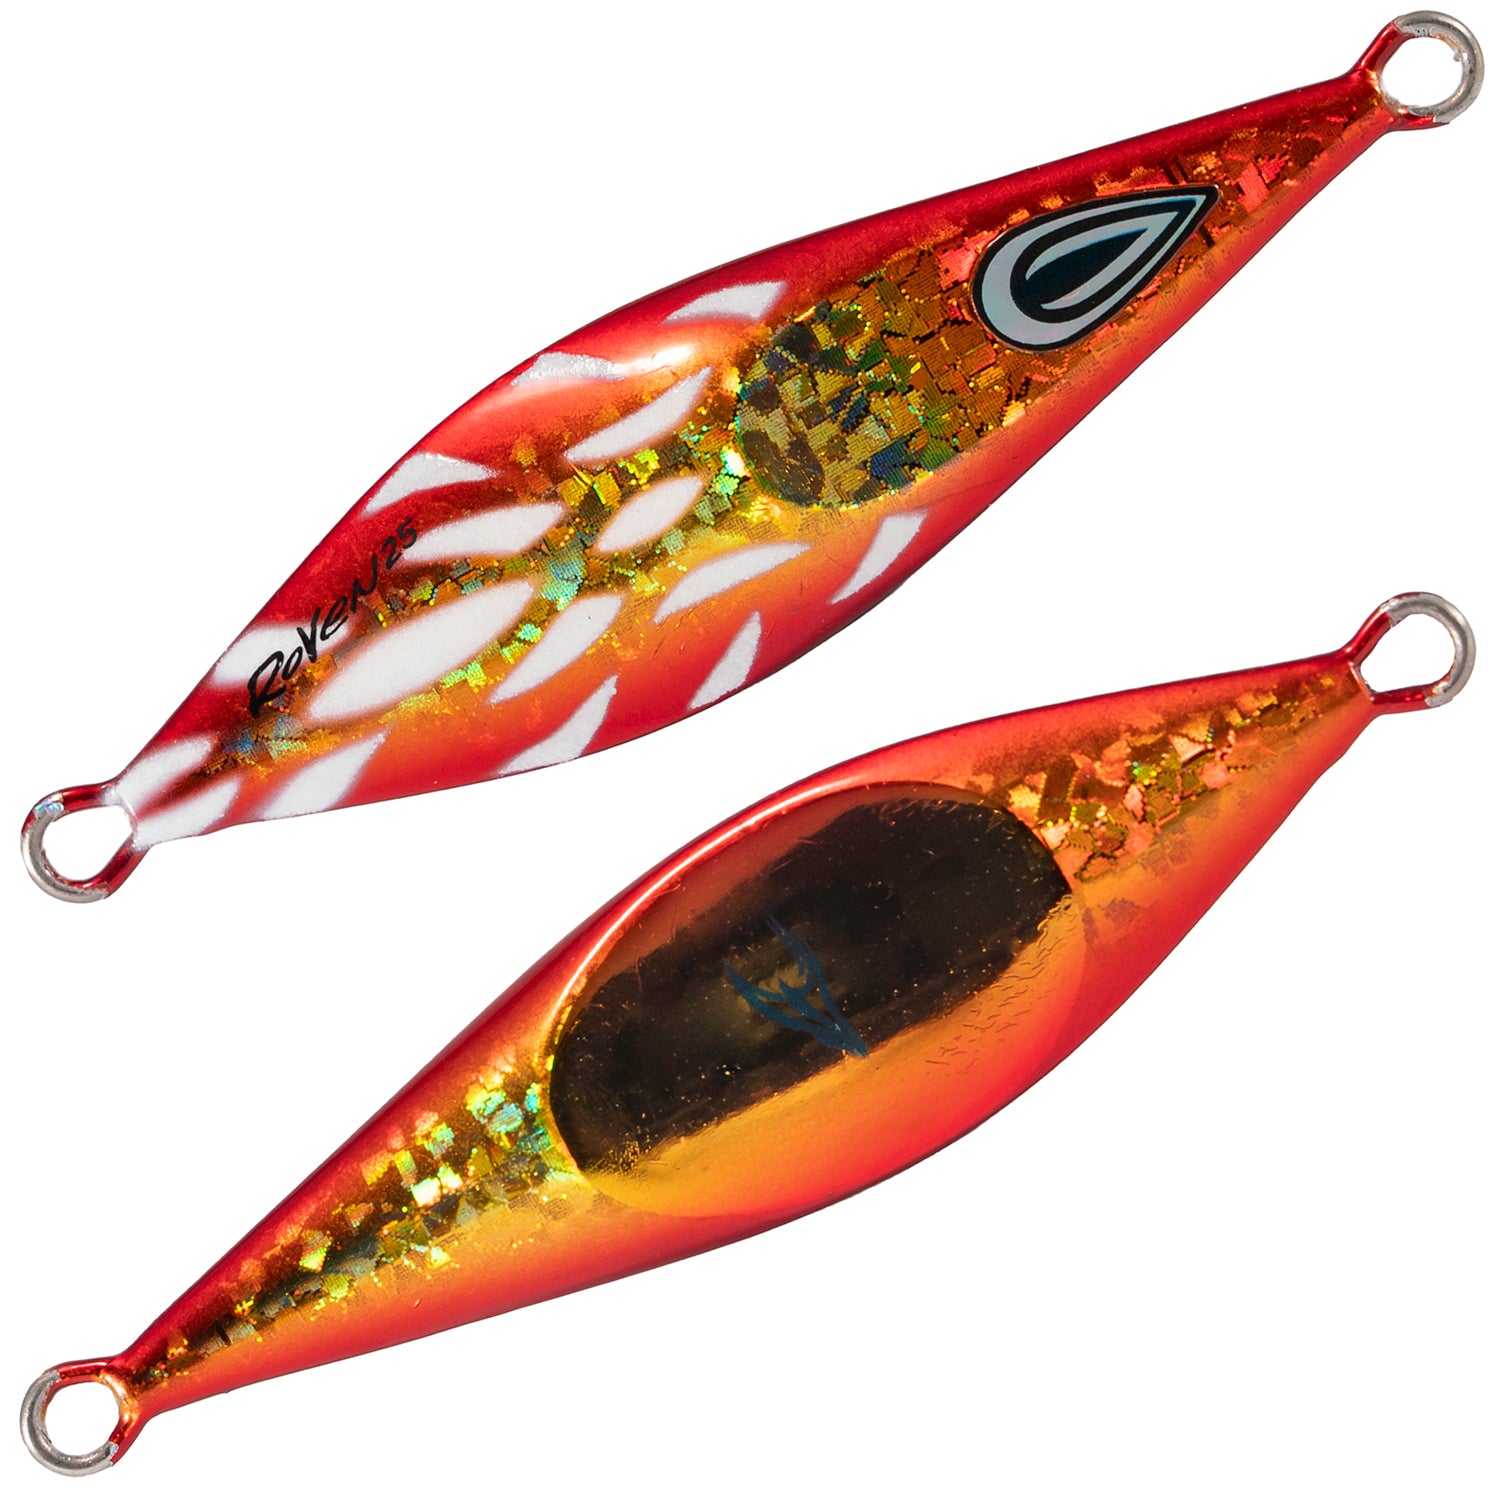 OCEANS LEGACY LONG CONTACT JIG LURE RIGGED 170g